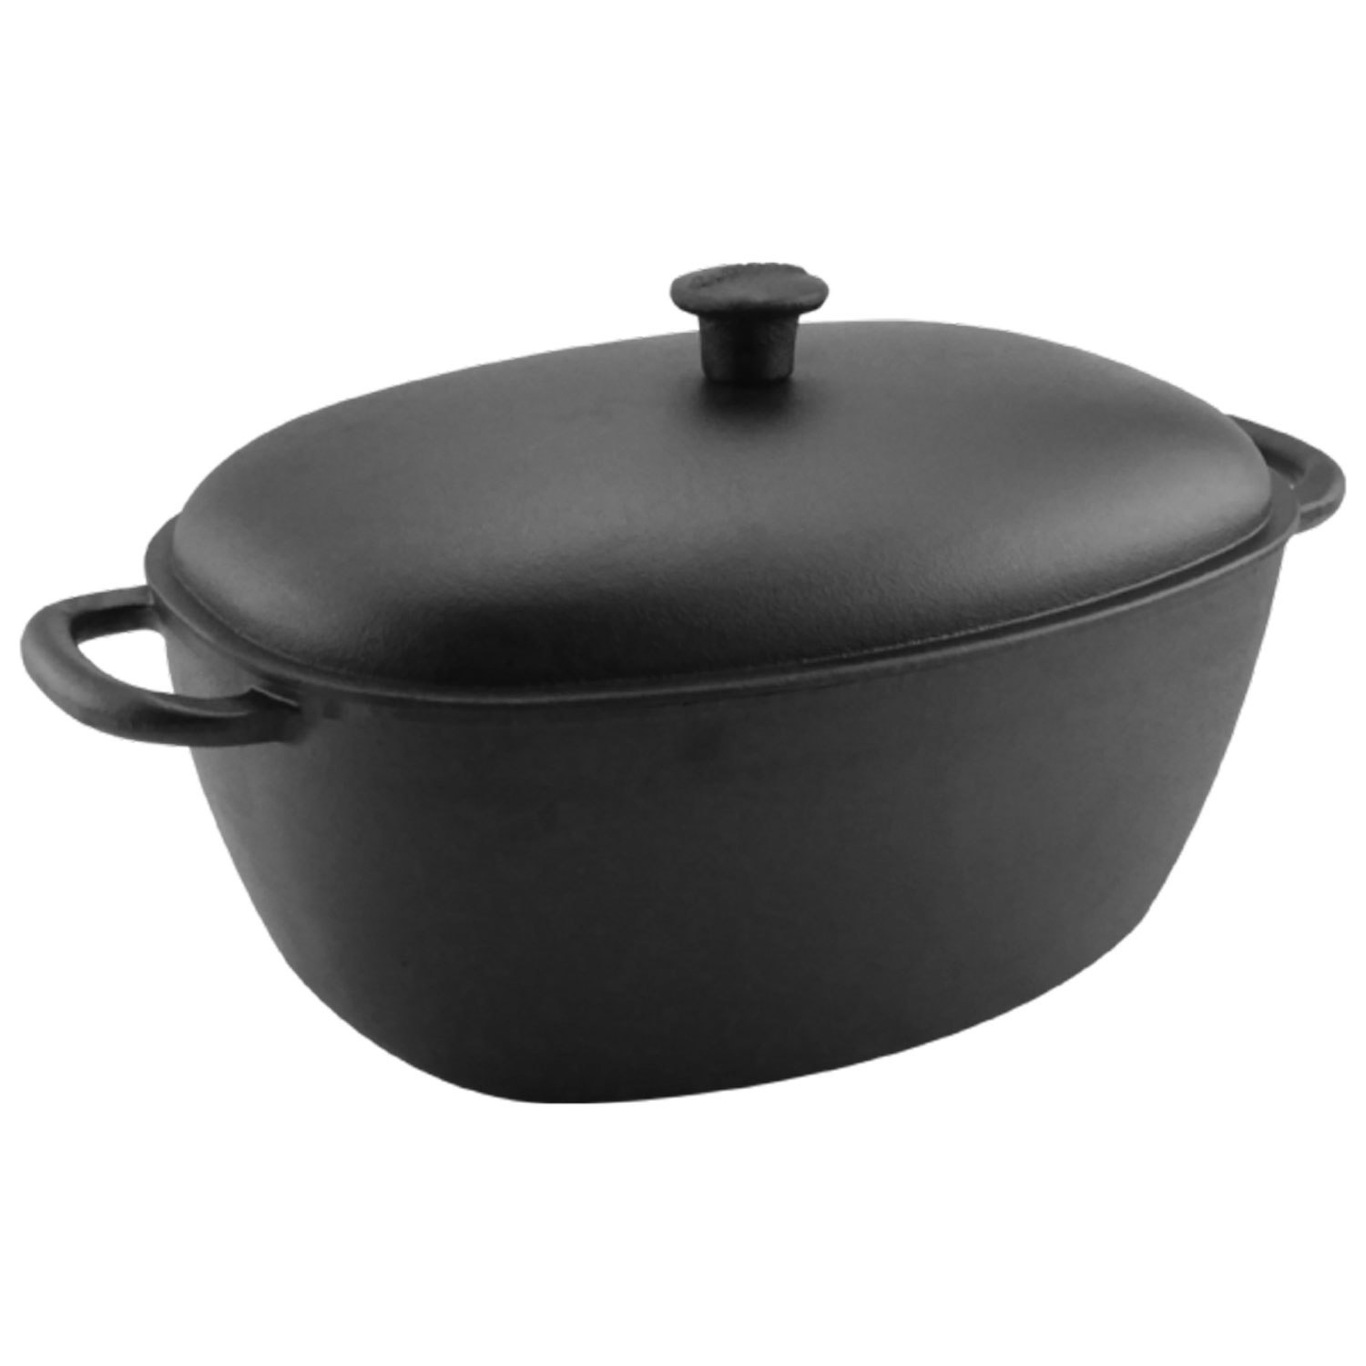 Oval Cast Iron Pot With Lid, 6 L